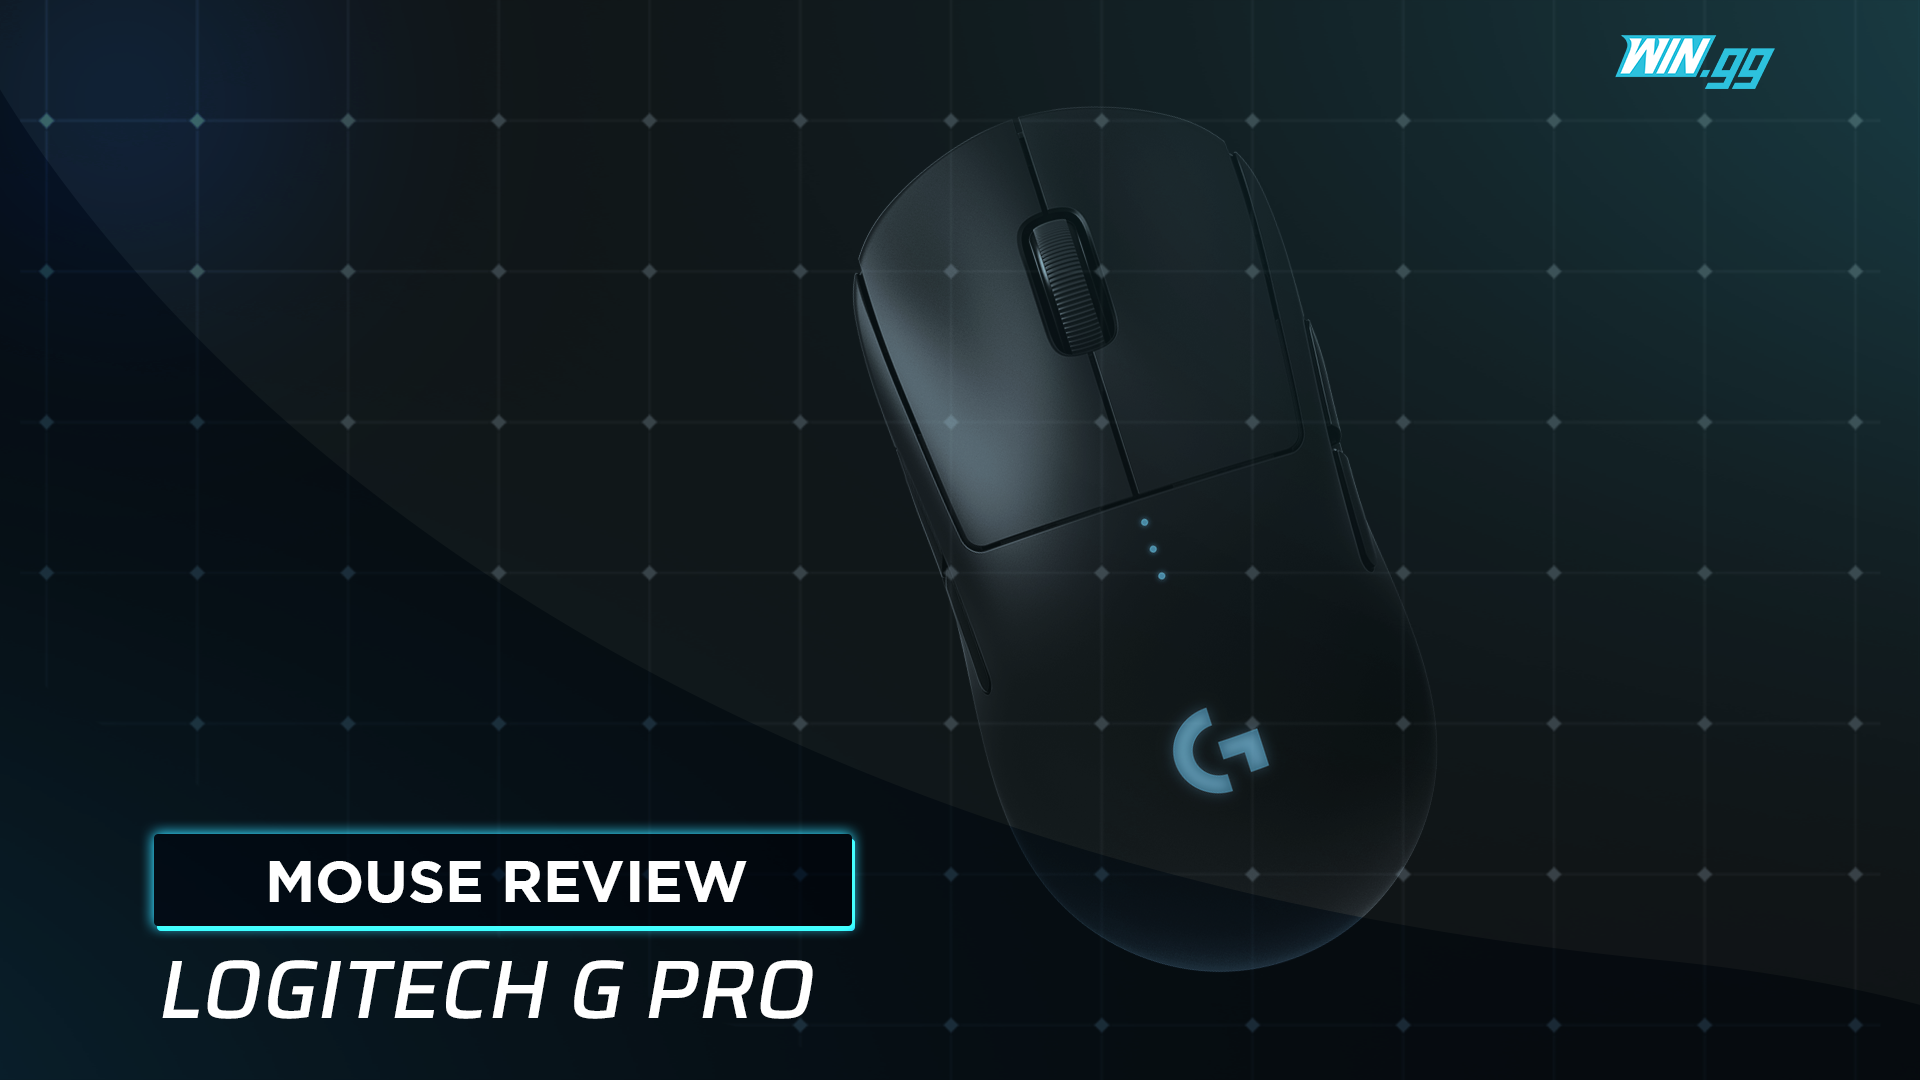 Is the Logitech G Pro Our gaming mouse review - WIN.gg